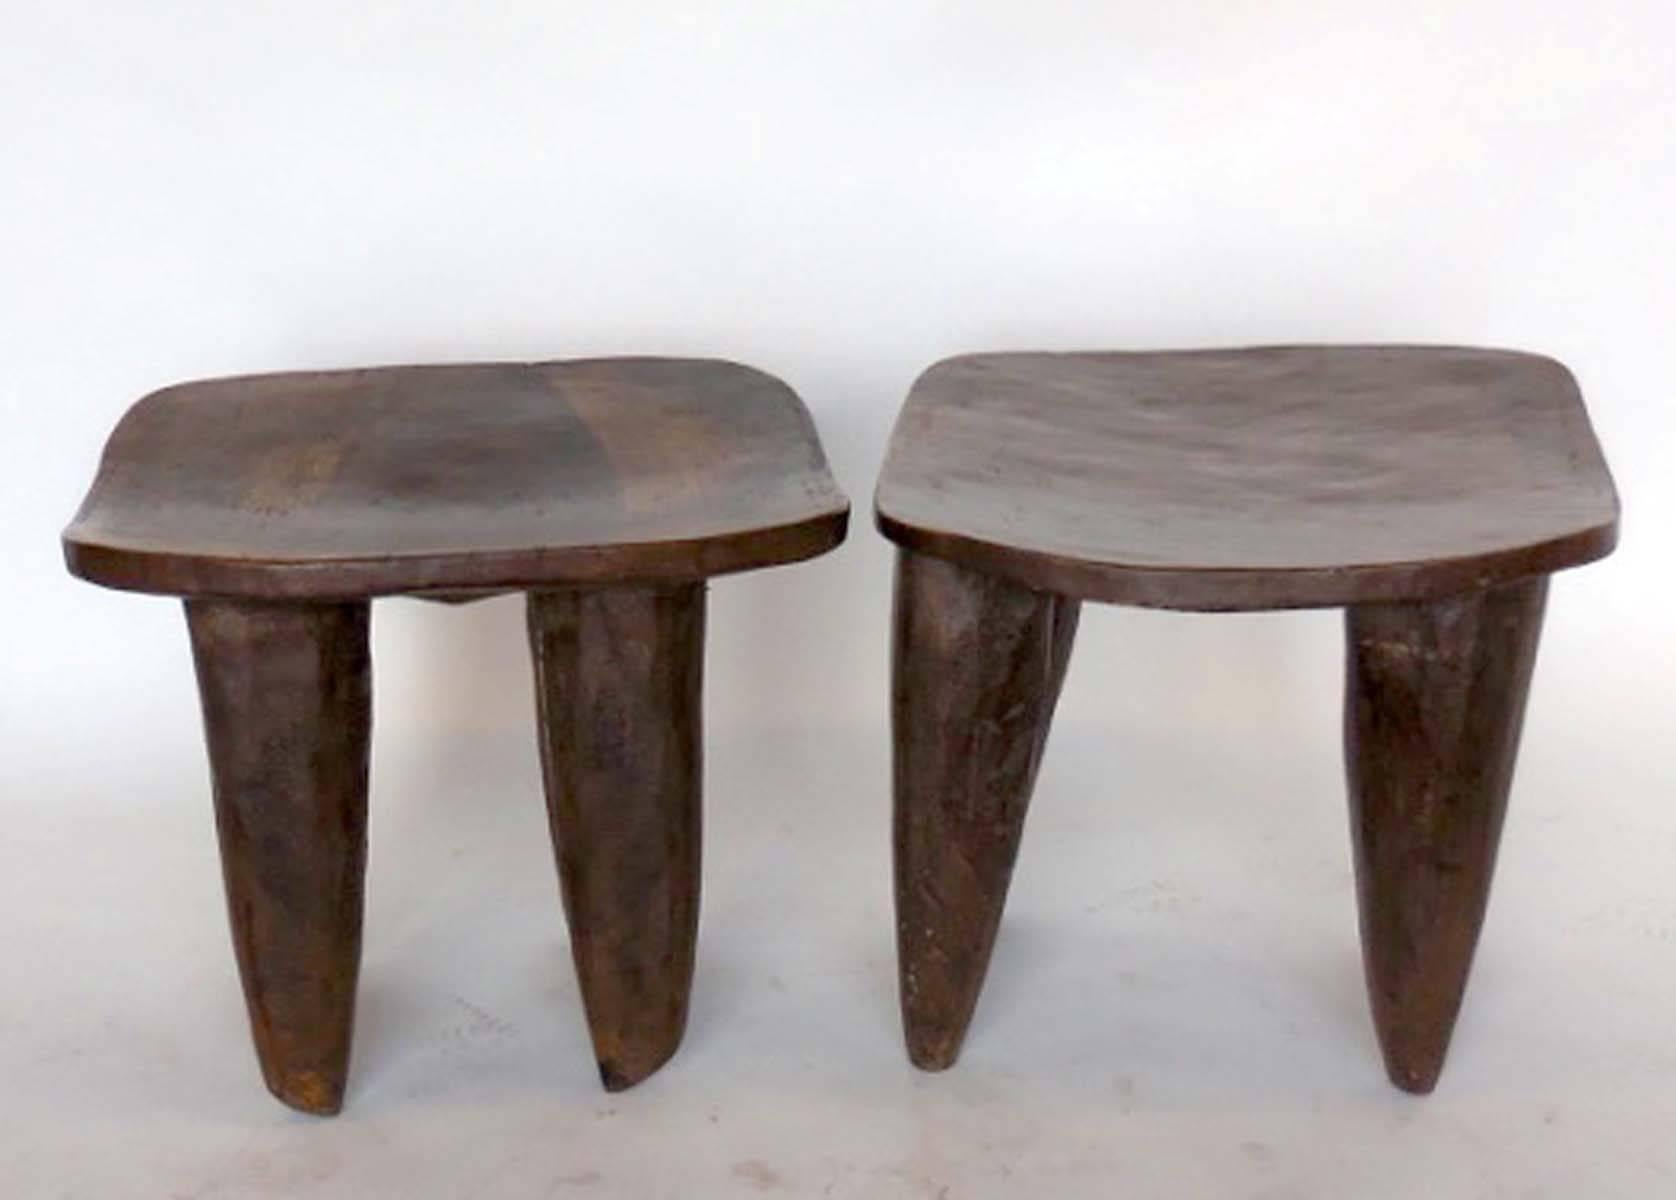 20th Century Tribal Hand-Carved Stools from Mali